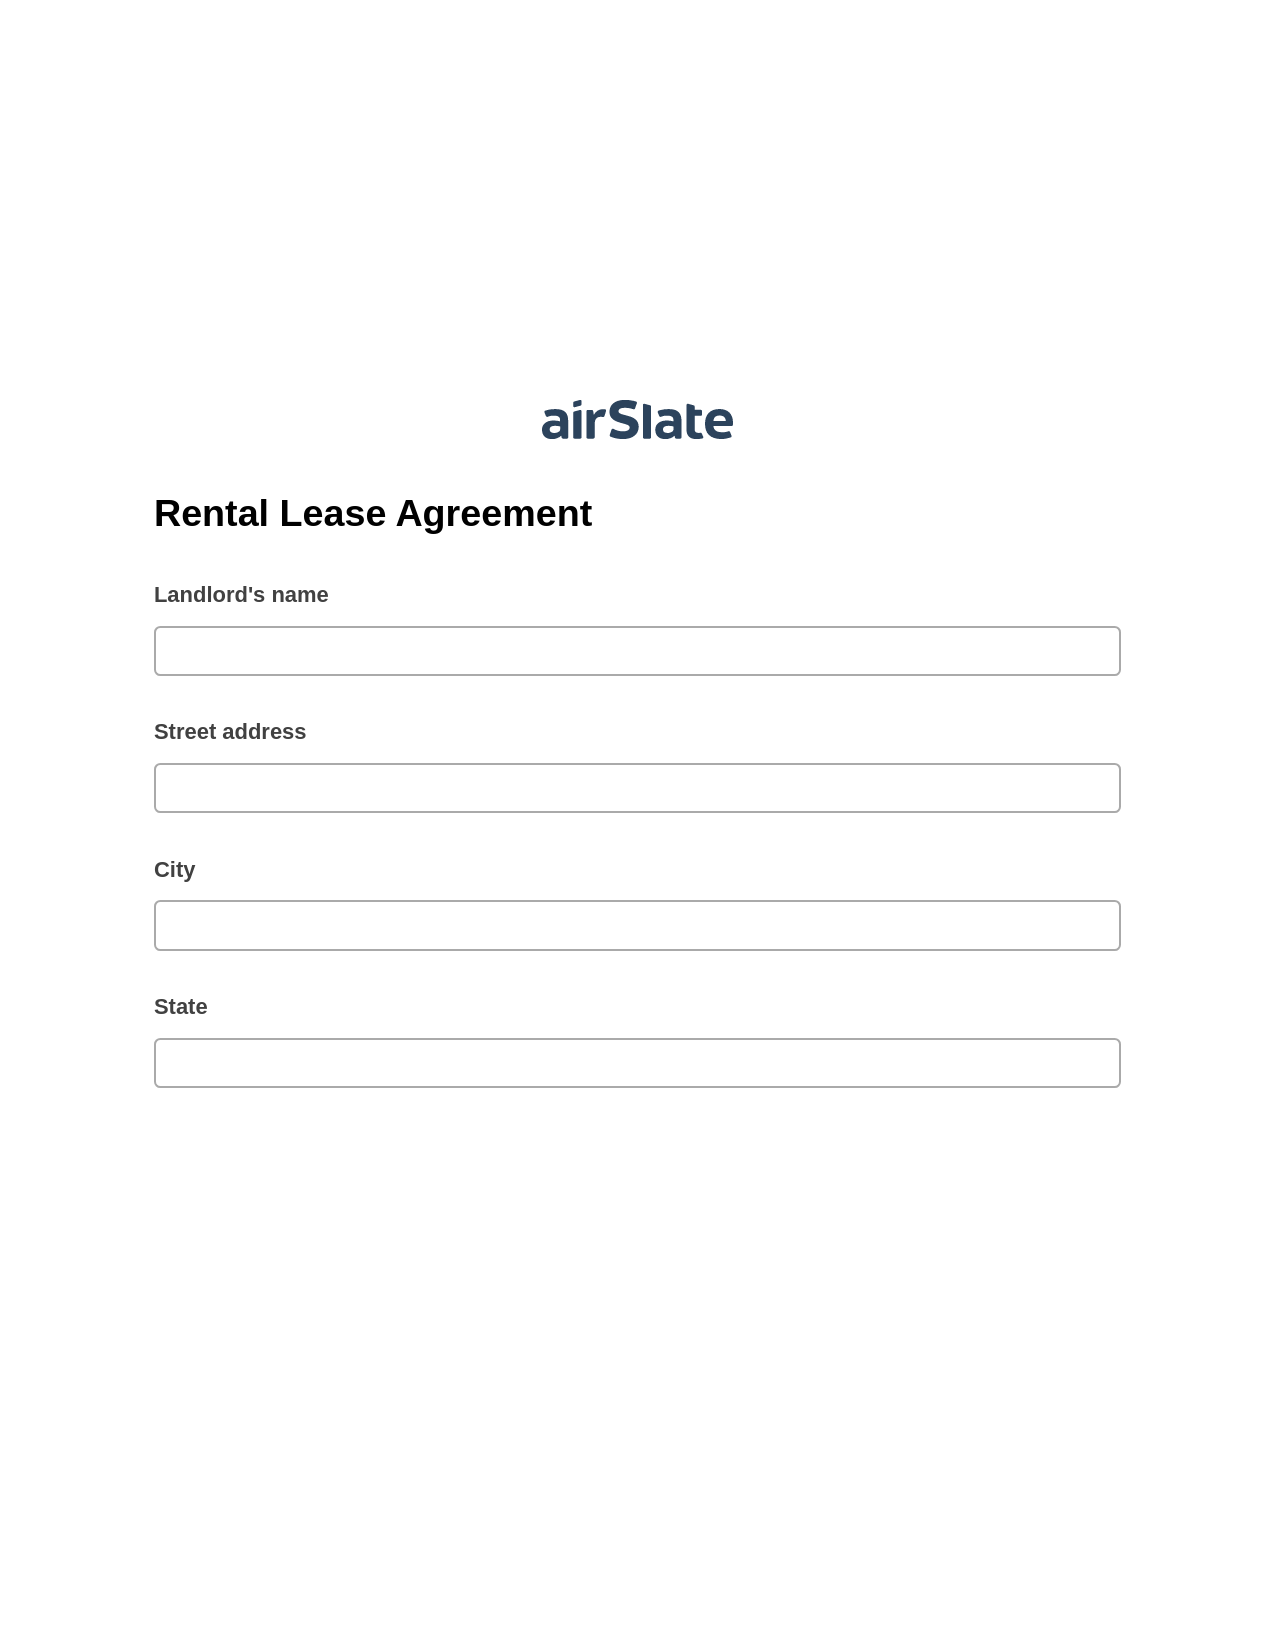 Multirole Rental Lease Agreement Pre-fill from MySQL Dropdown Options Bot, Create slate from another Flow Bot, Export to Smartsheet